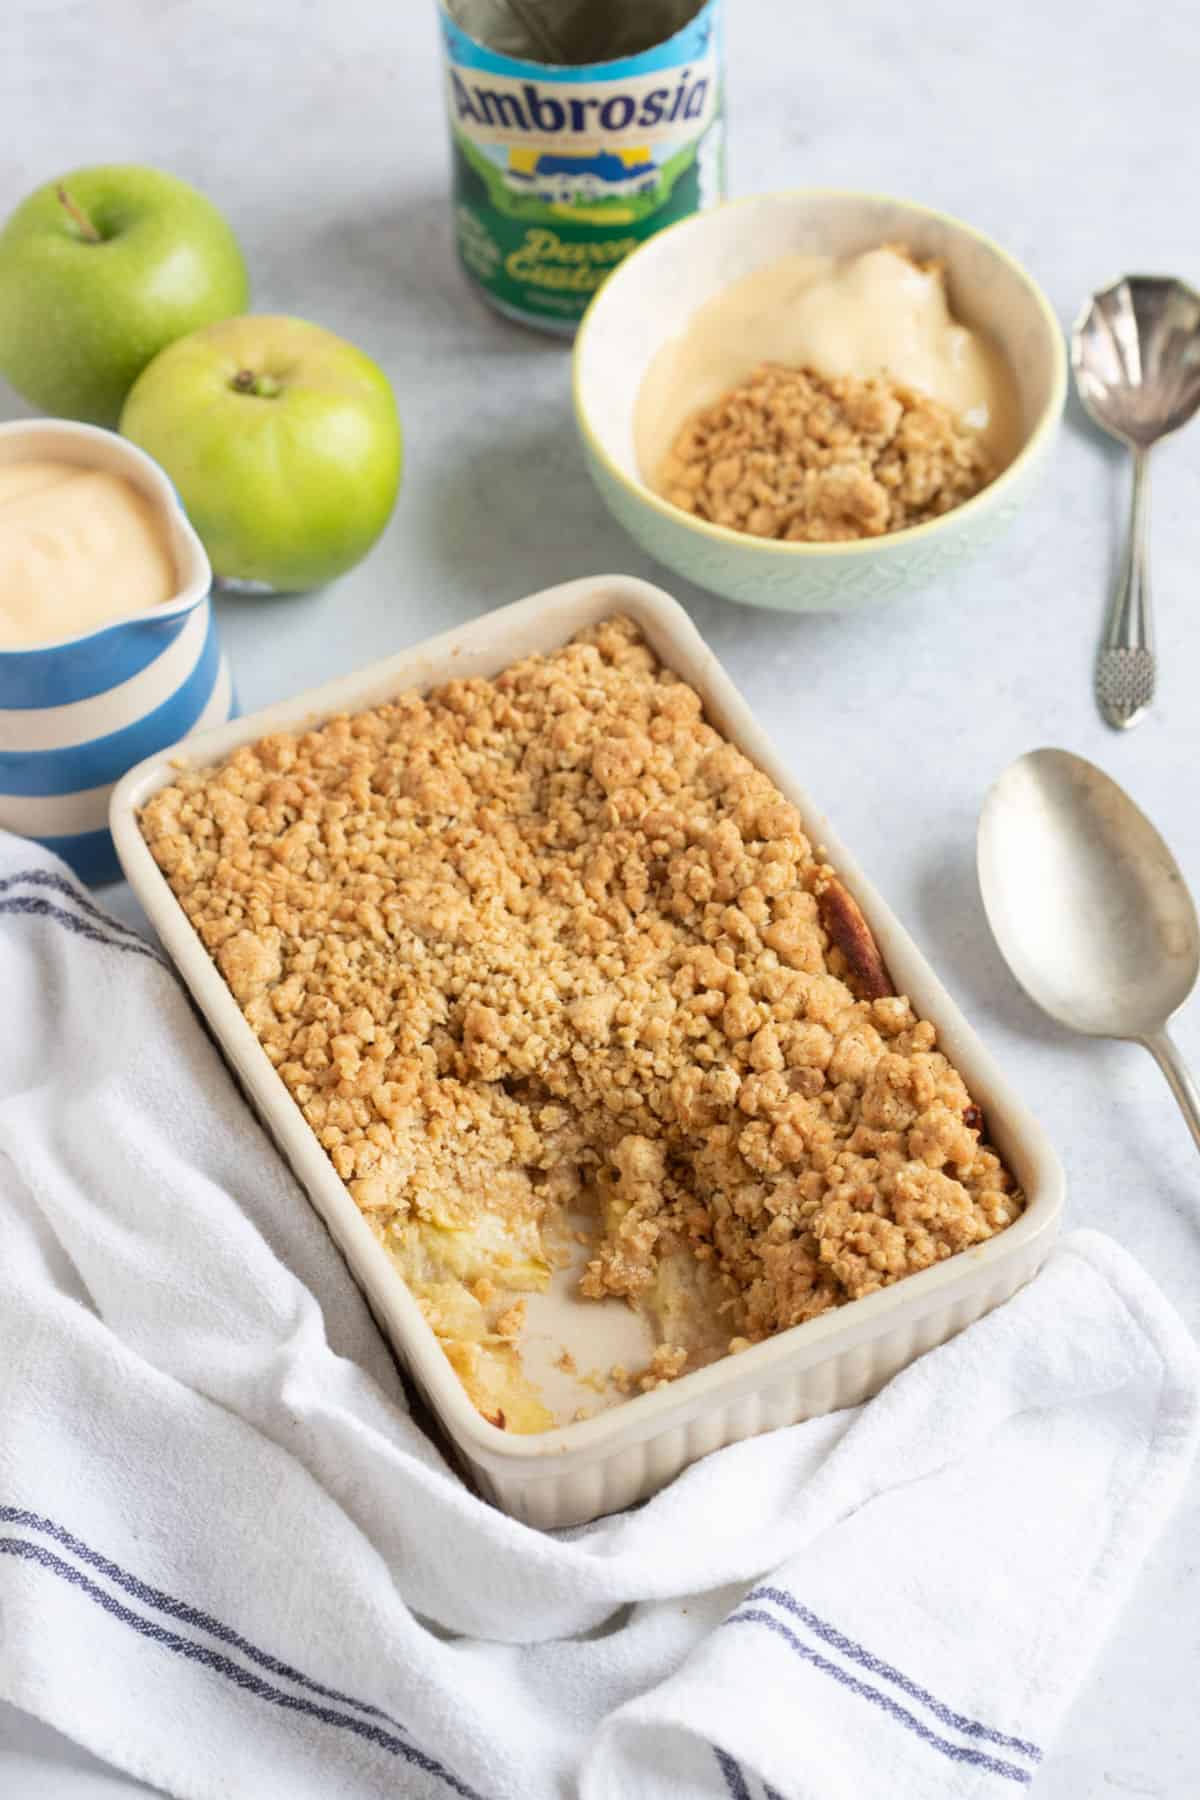 Apple crumble in a baking dish with a jug of custard.